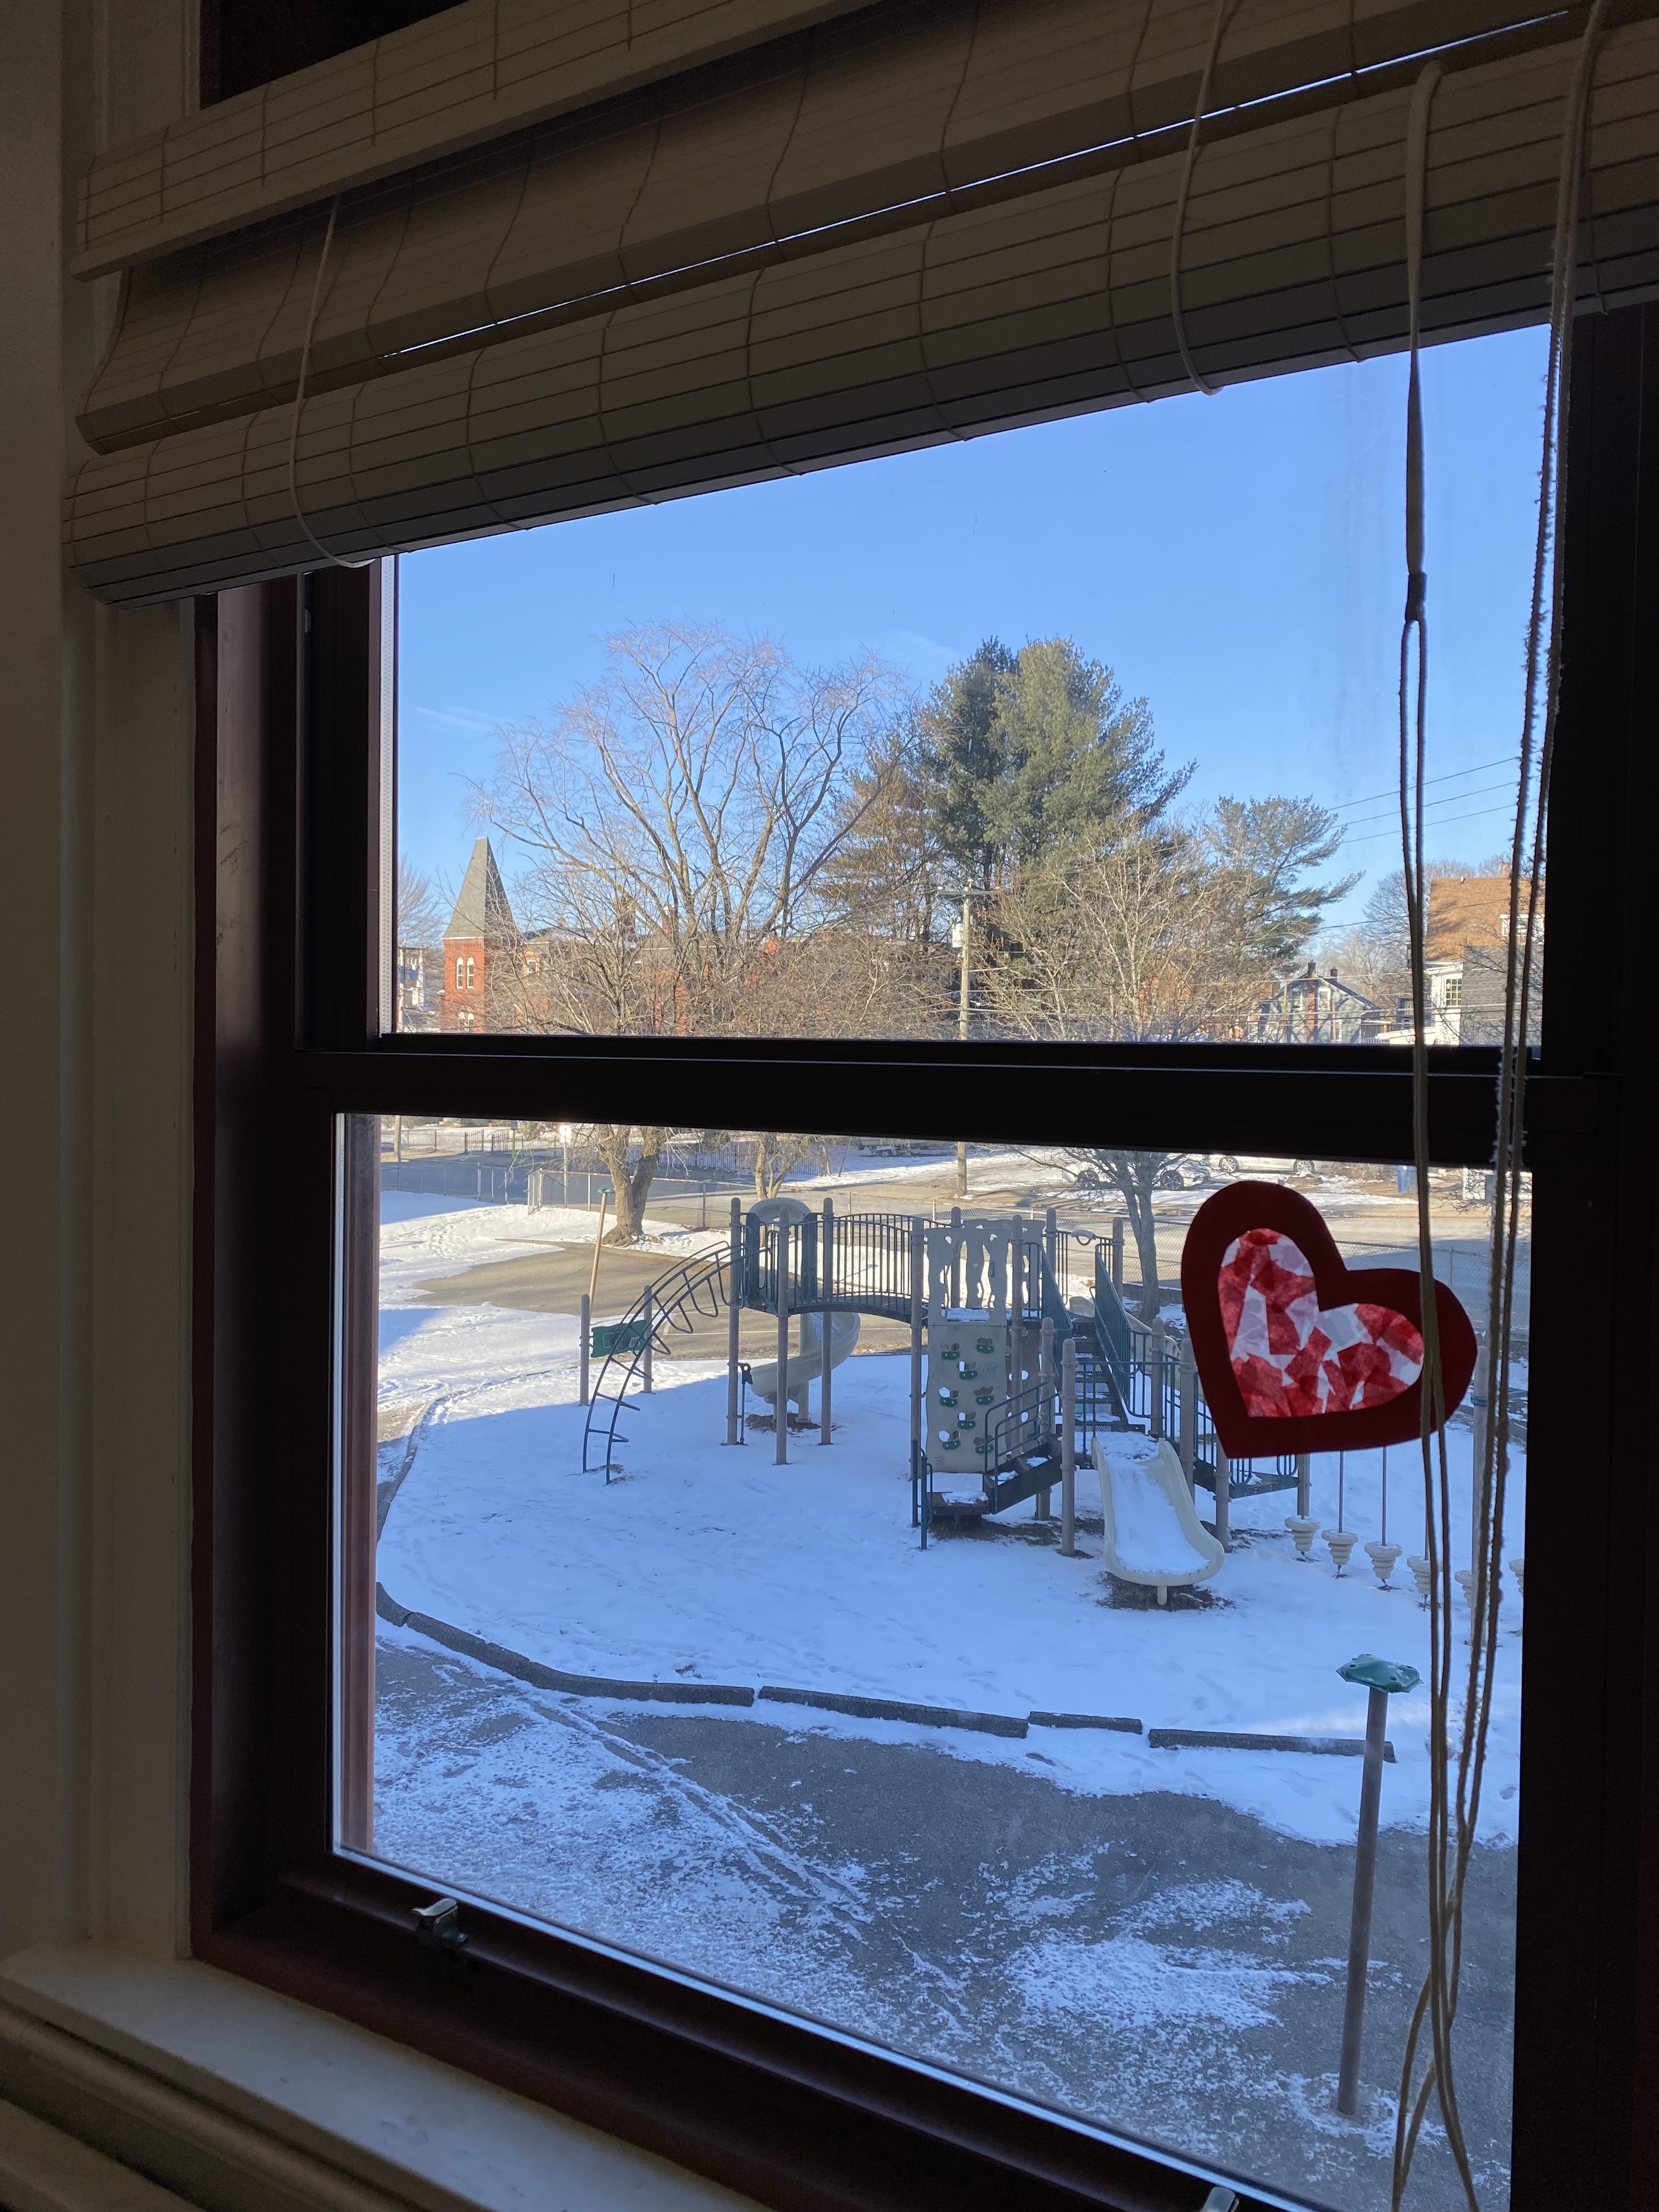  This is an image of the view out of a window of a deserted snowy playground from an upper story window. There is a heart decal on the bottom window frame made of tissue paper. 